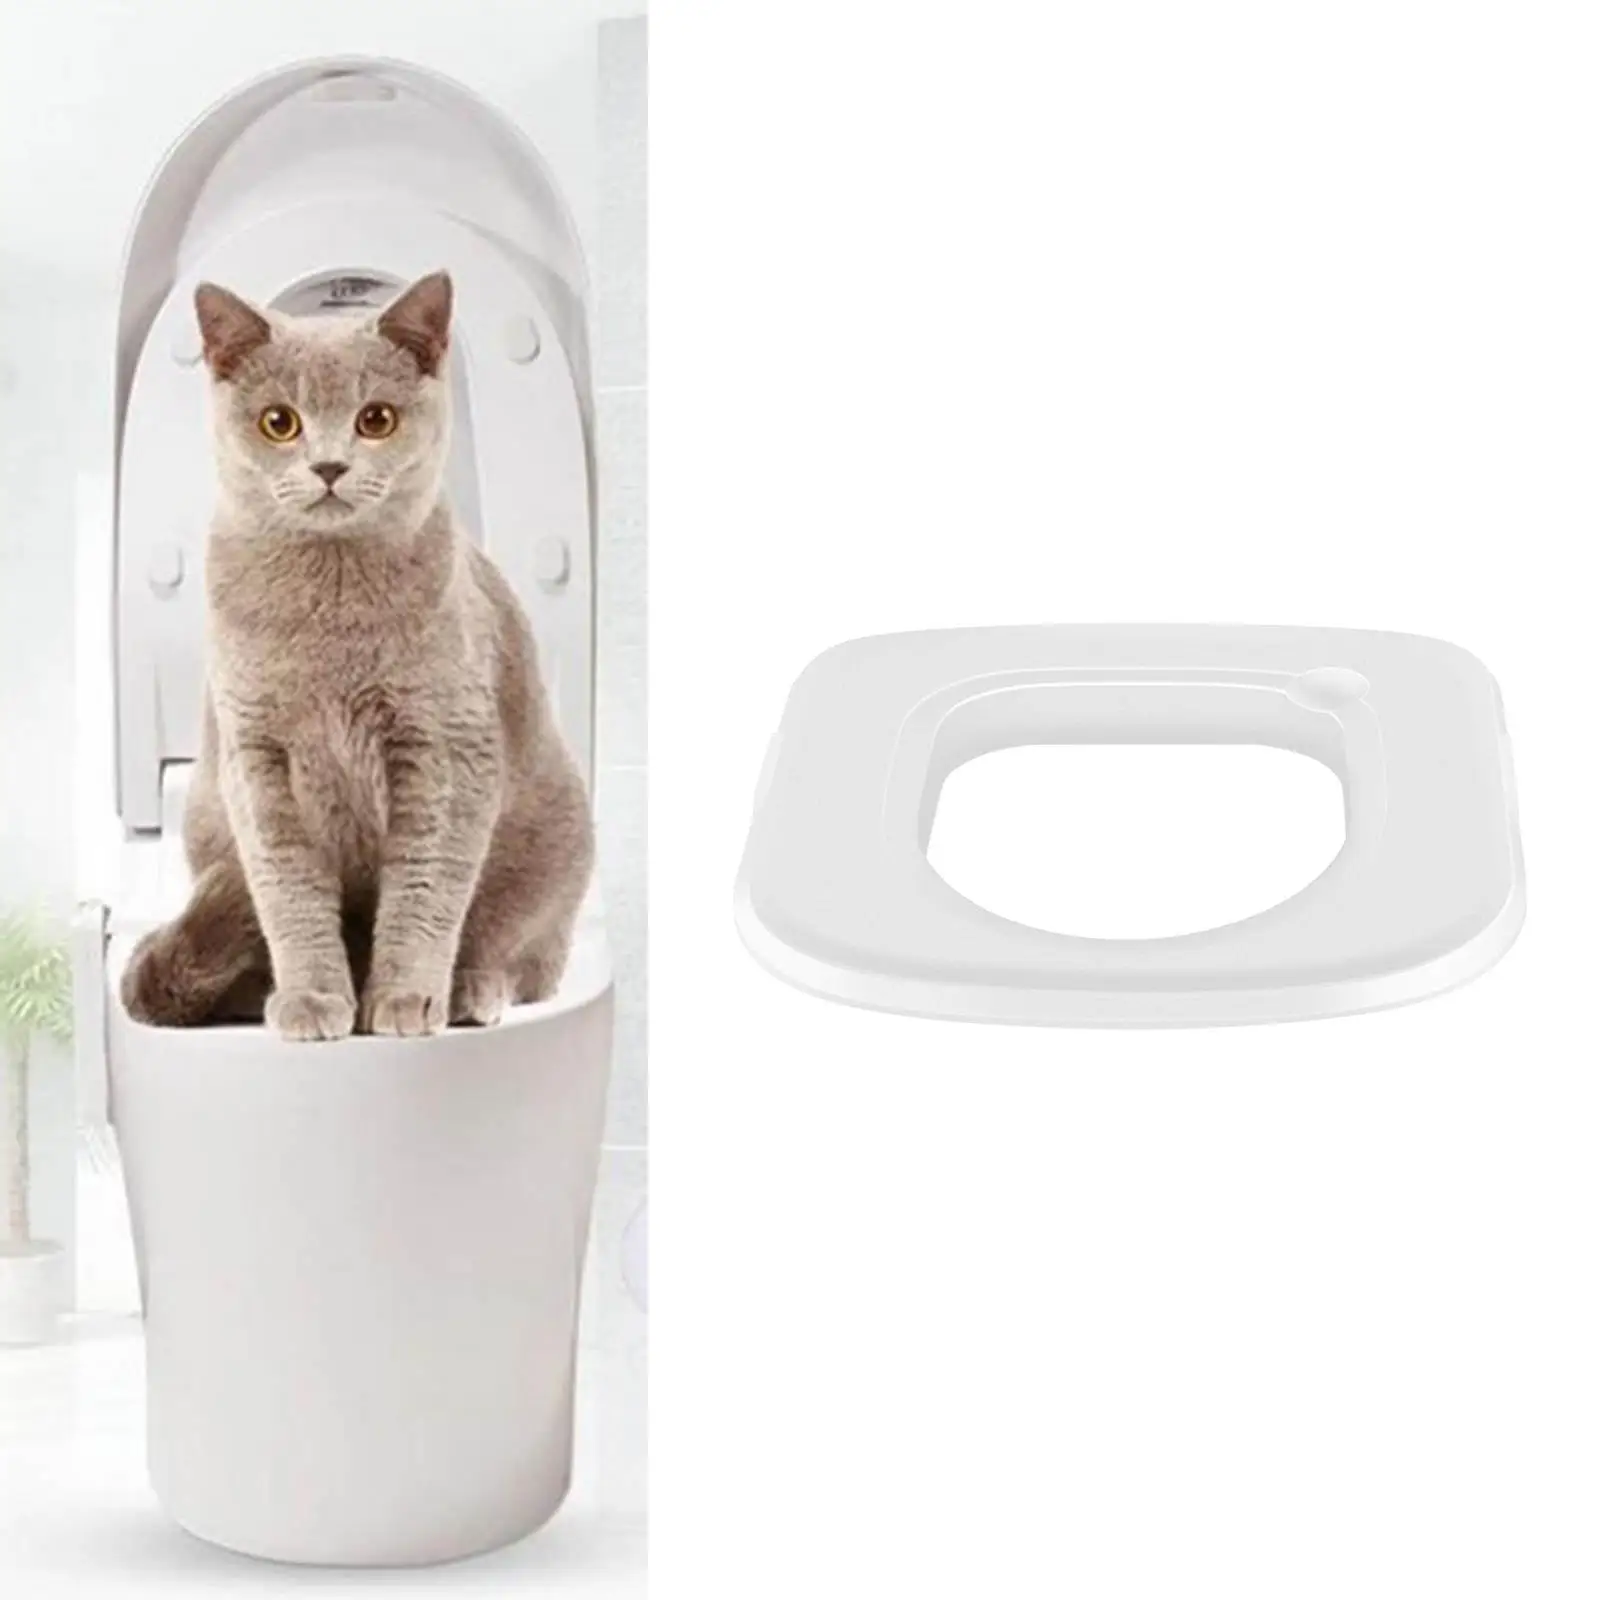 Cat Toilet Training Kit Pets Training Cat Litter Tray Cat Toilet Trainer for Teaching Cat to Use Toilet